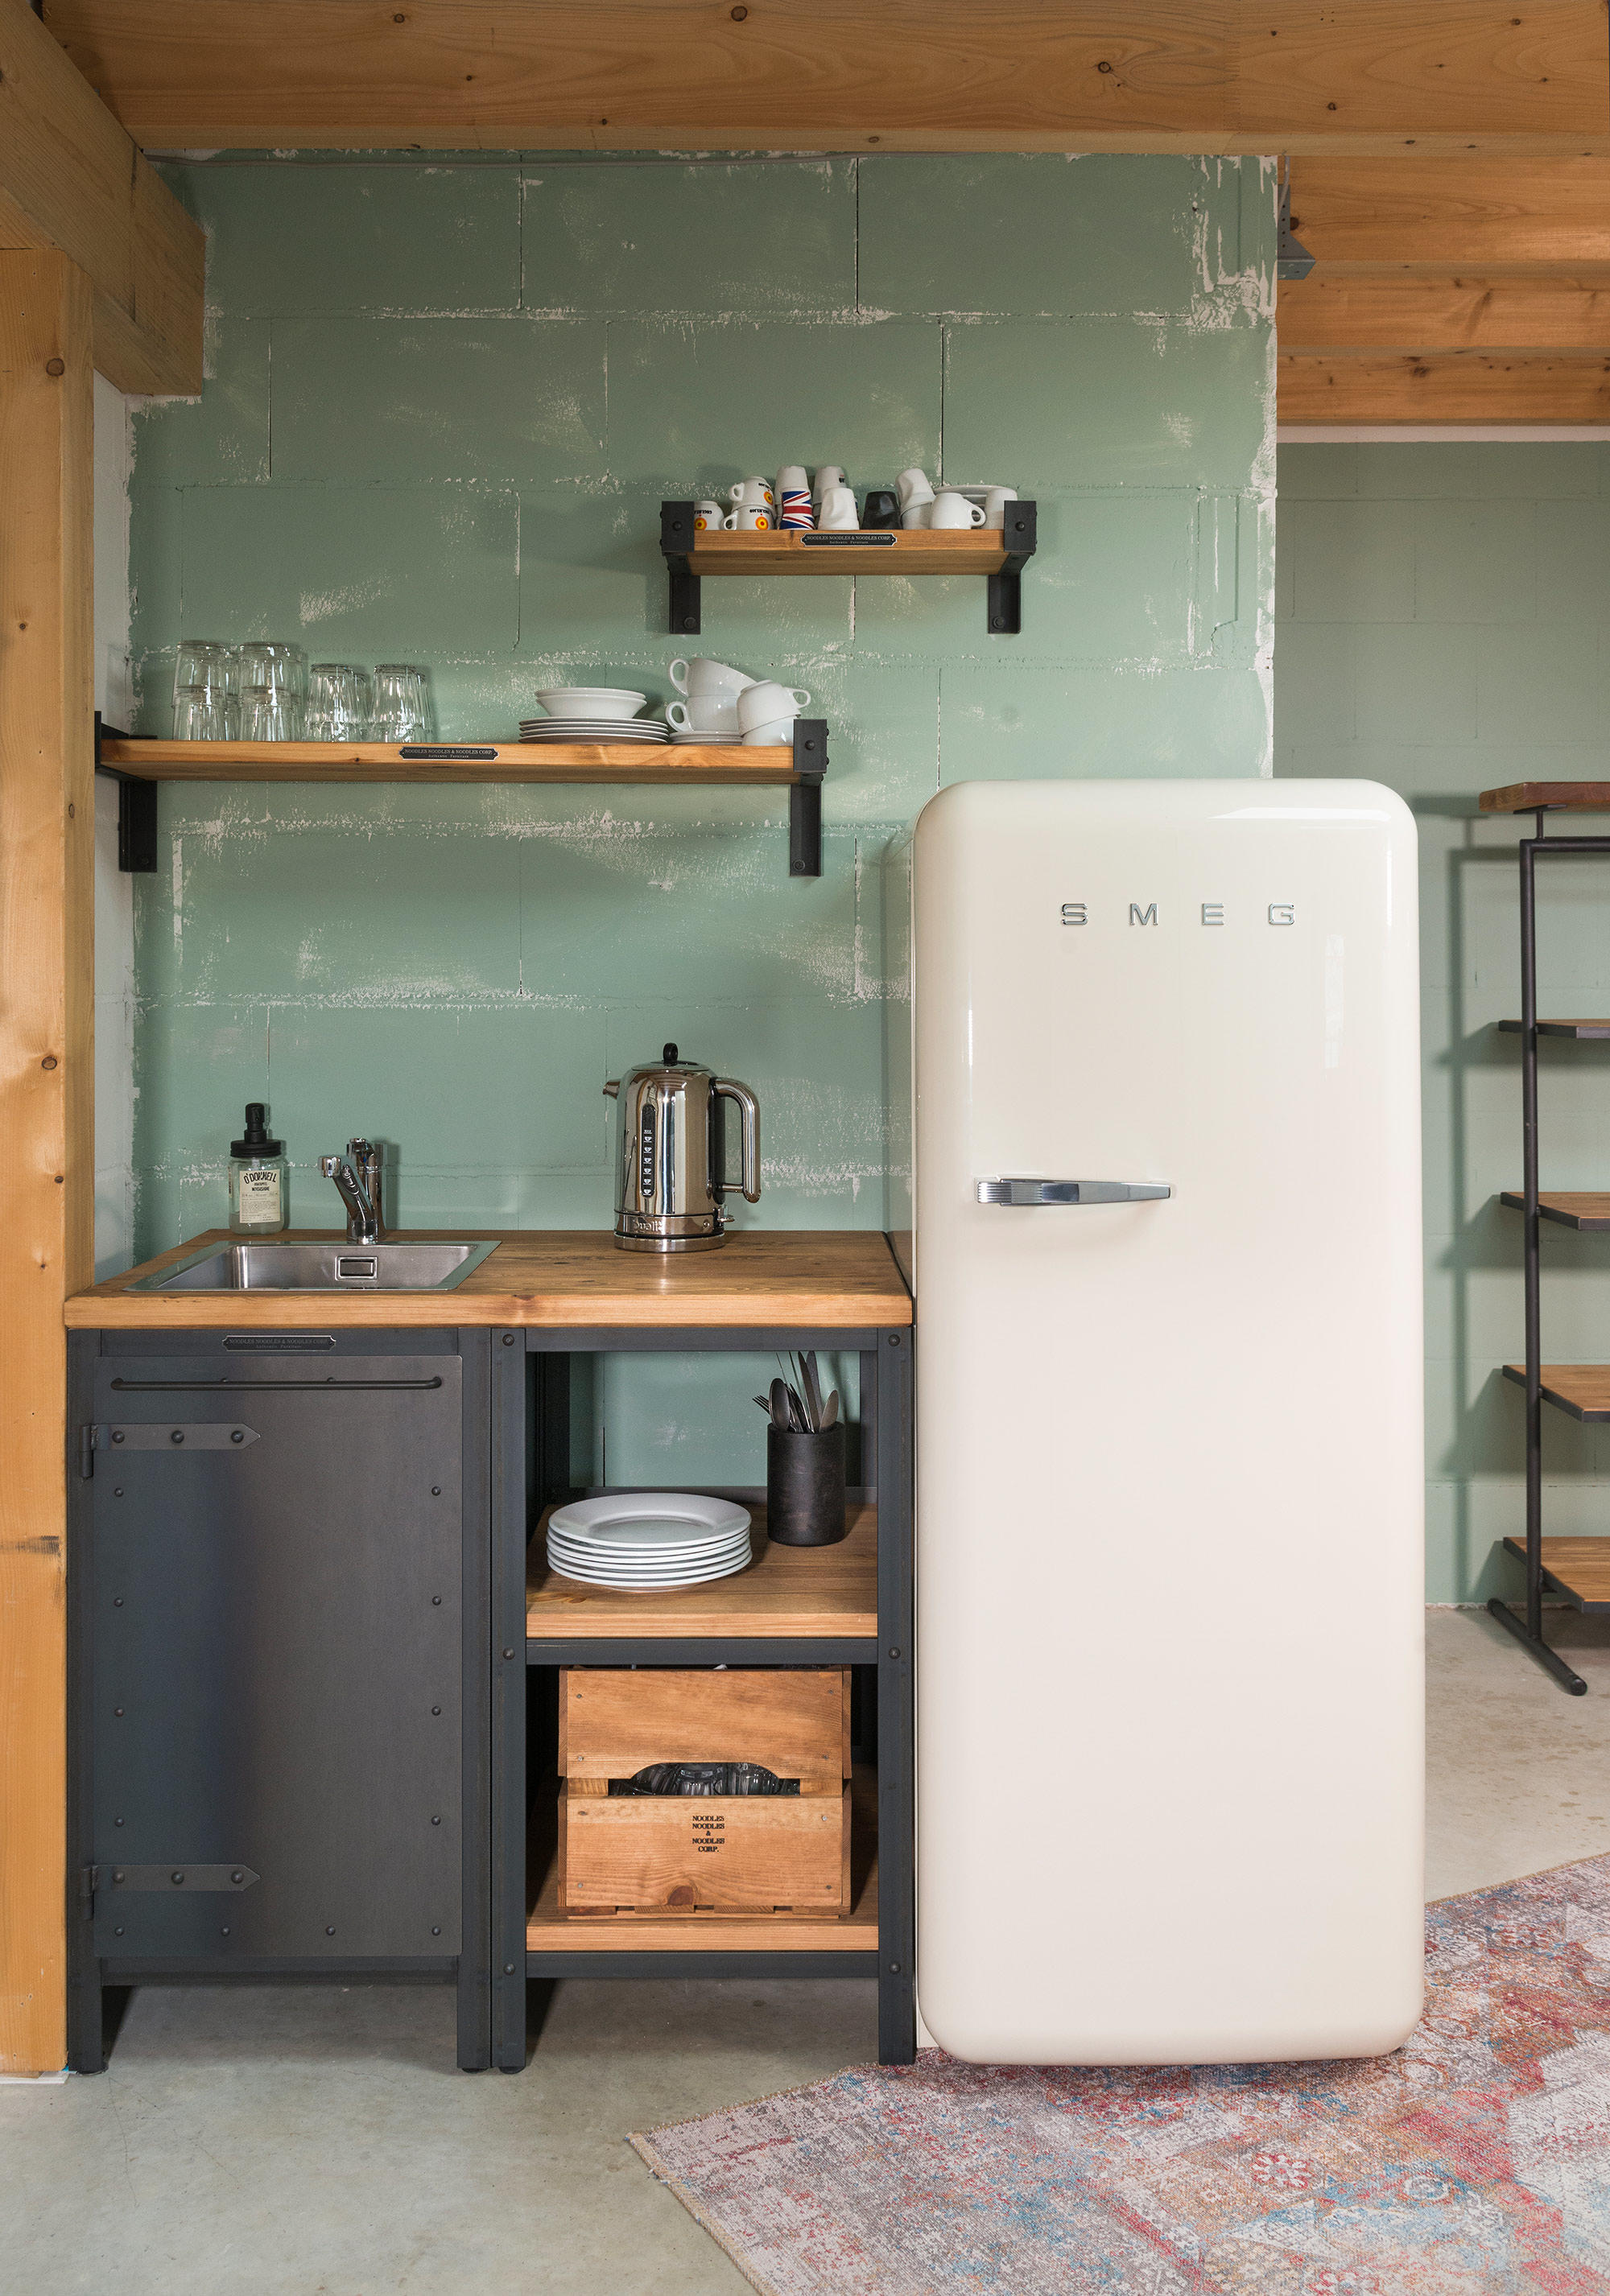 Authentic Kitchen Furniture and Industrial Design